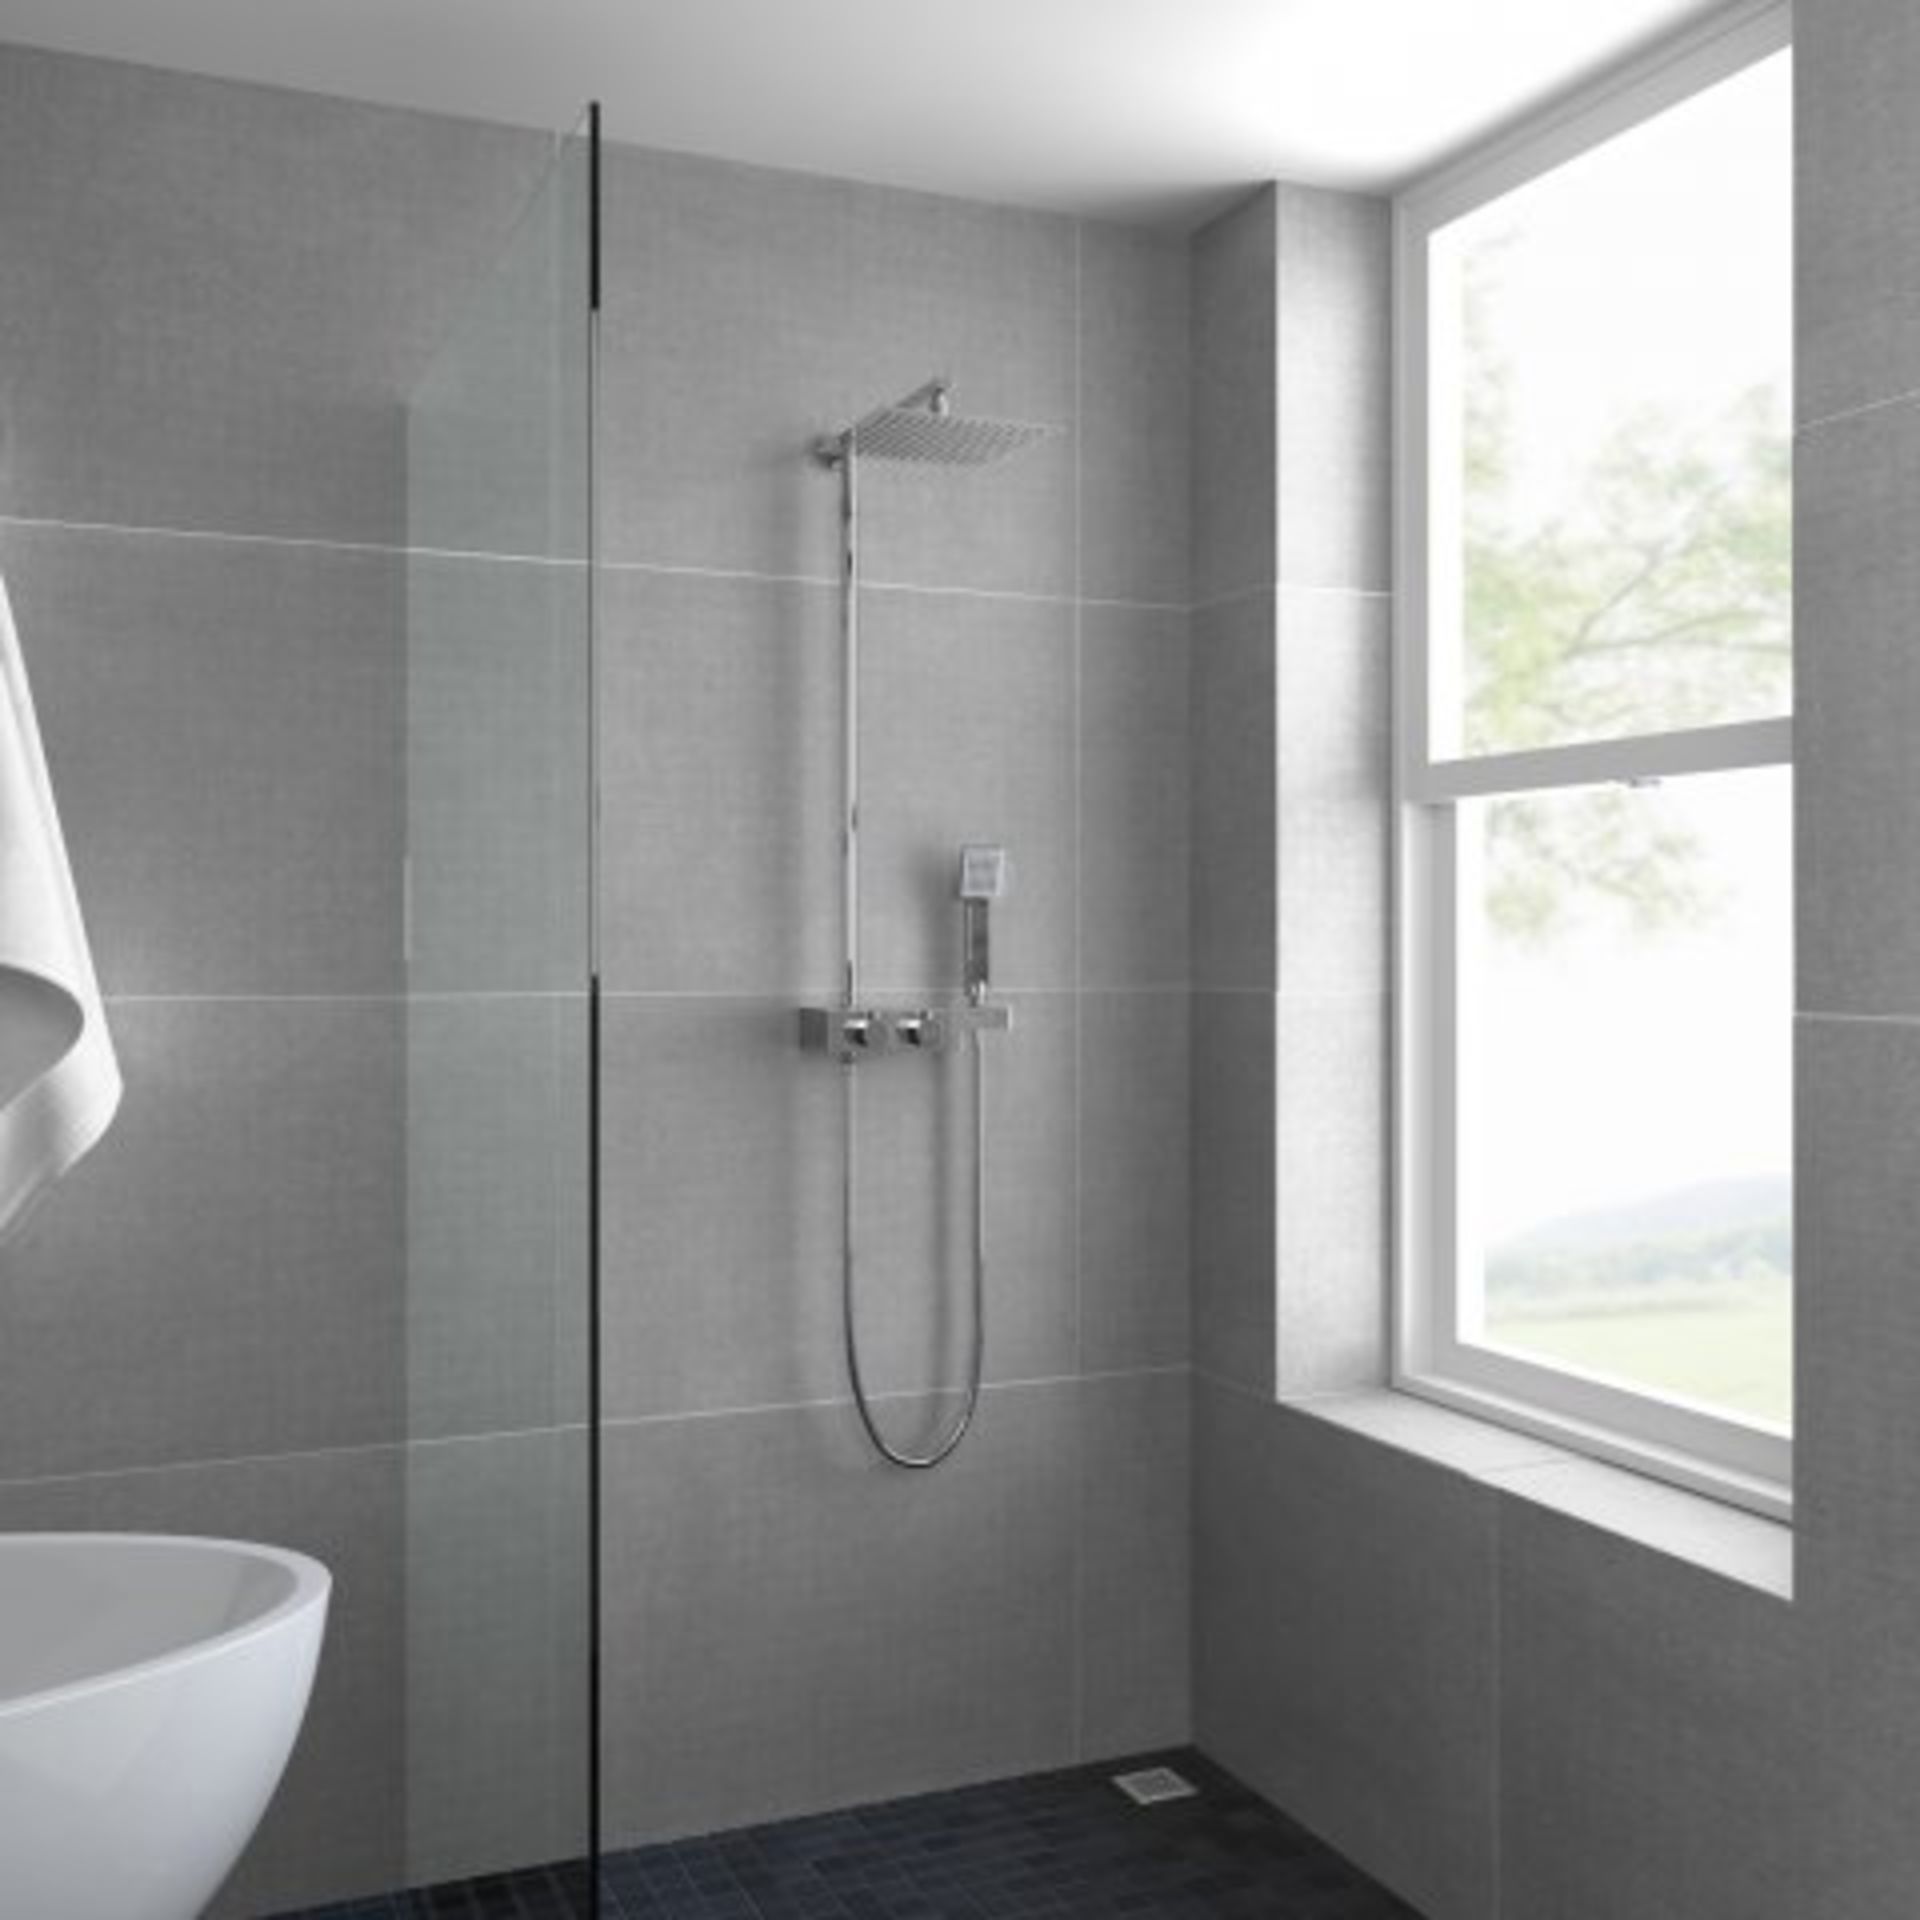 (O209) Thermostatic Exposed Shower Kit 250mm Square Head Handheld. RRP £349.99. Designer Style Our - Image 3 of 5